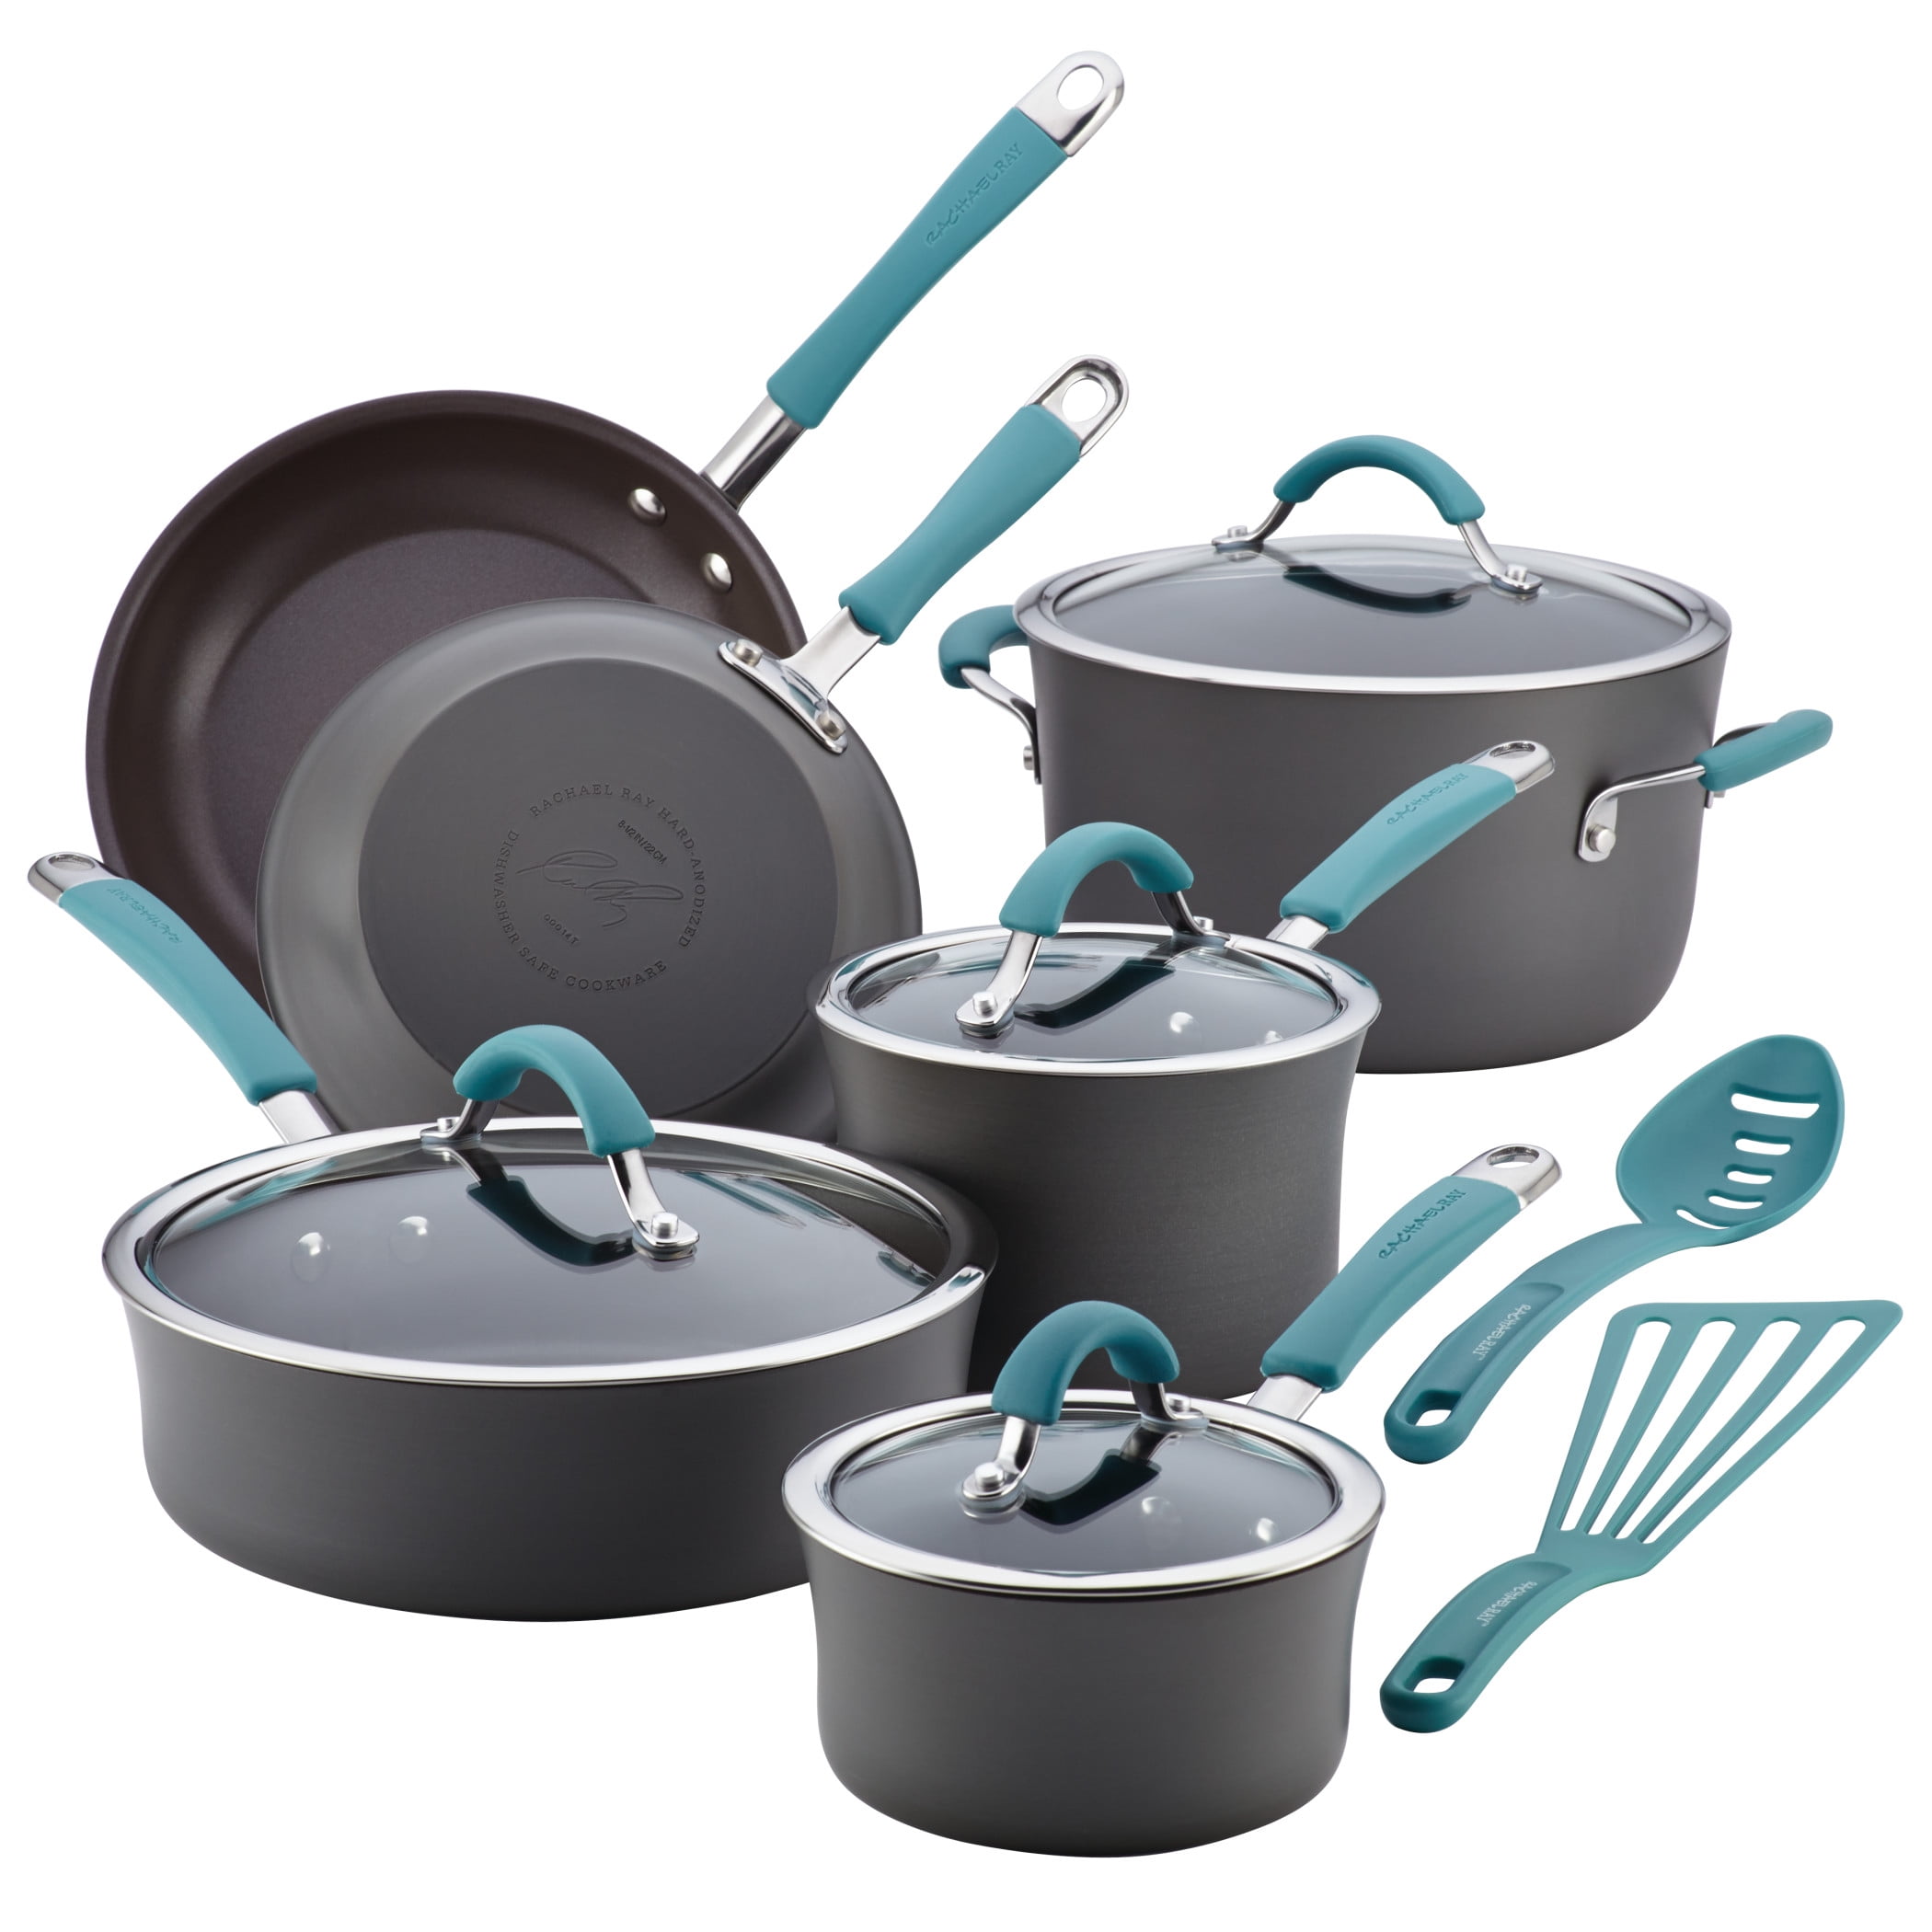 12 Count Rachael Ray 16344 Cucina Enamel Nonstick Cookware Agave Blue for sale online 